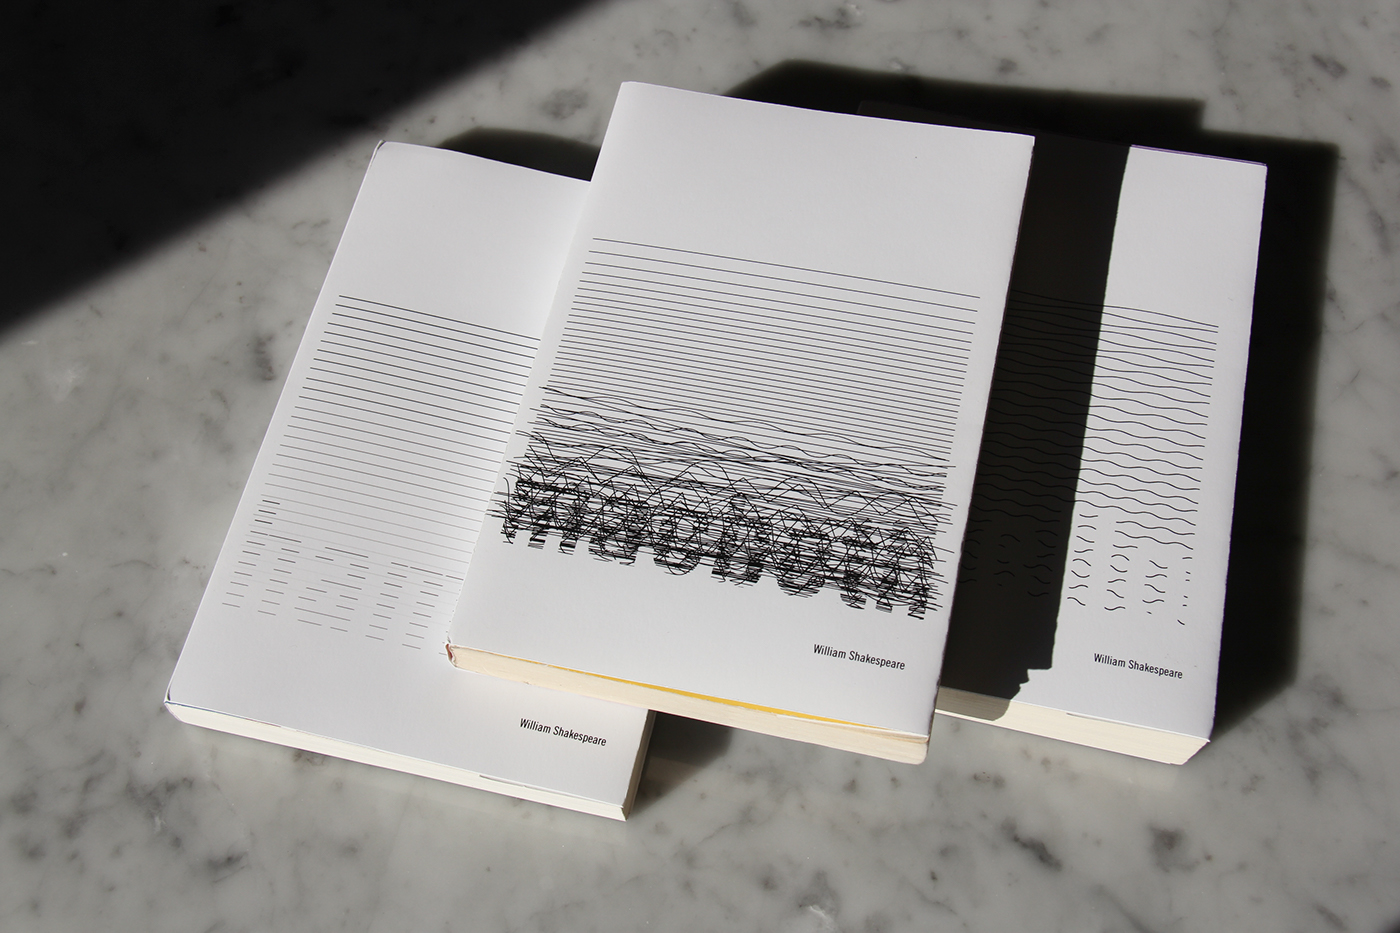 shakespeare book covers black and white minimalistic lines